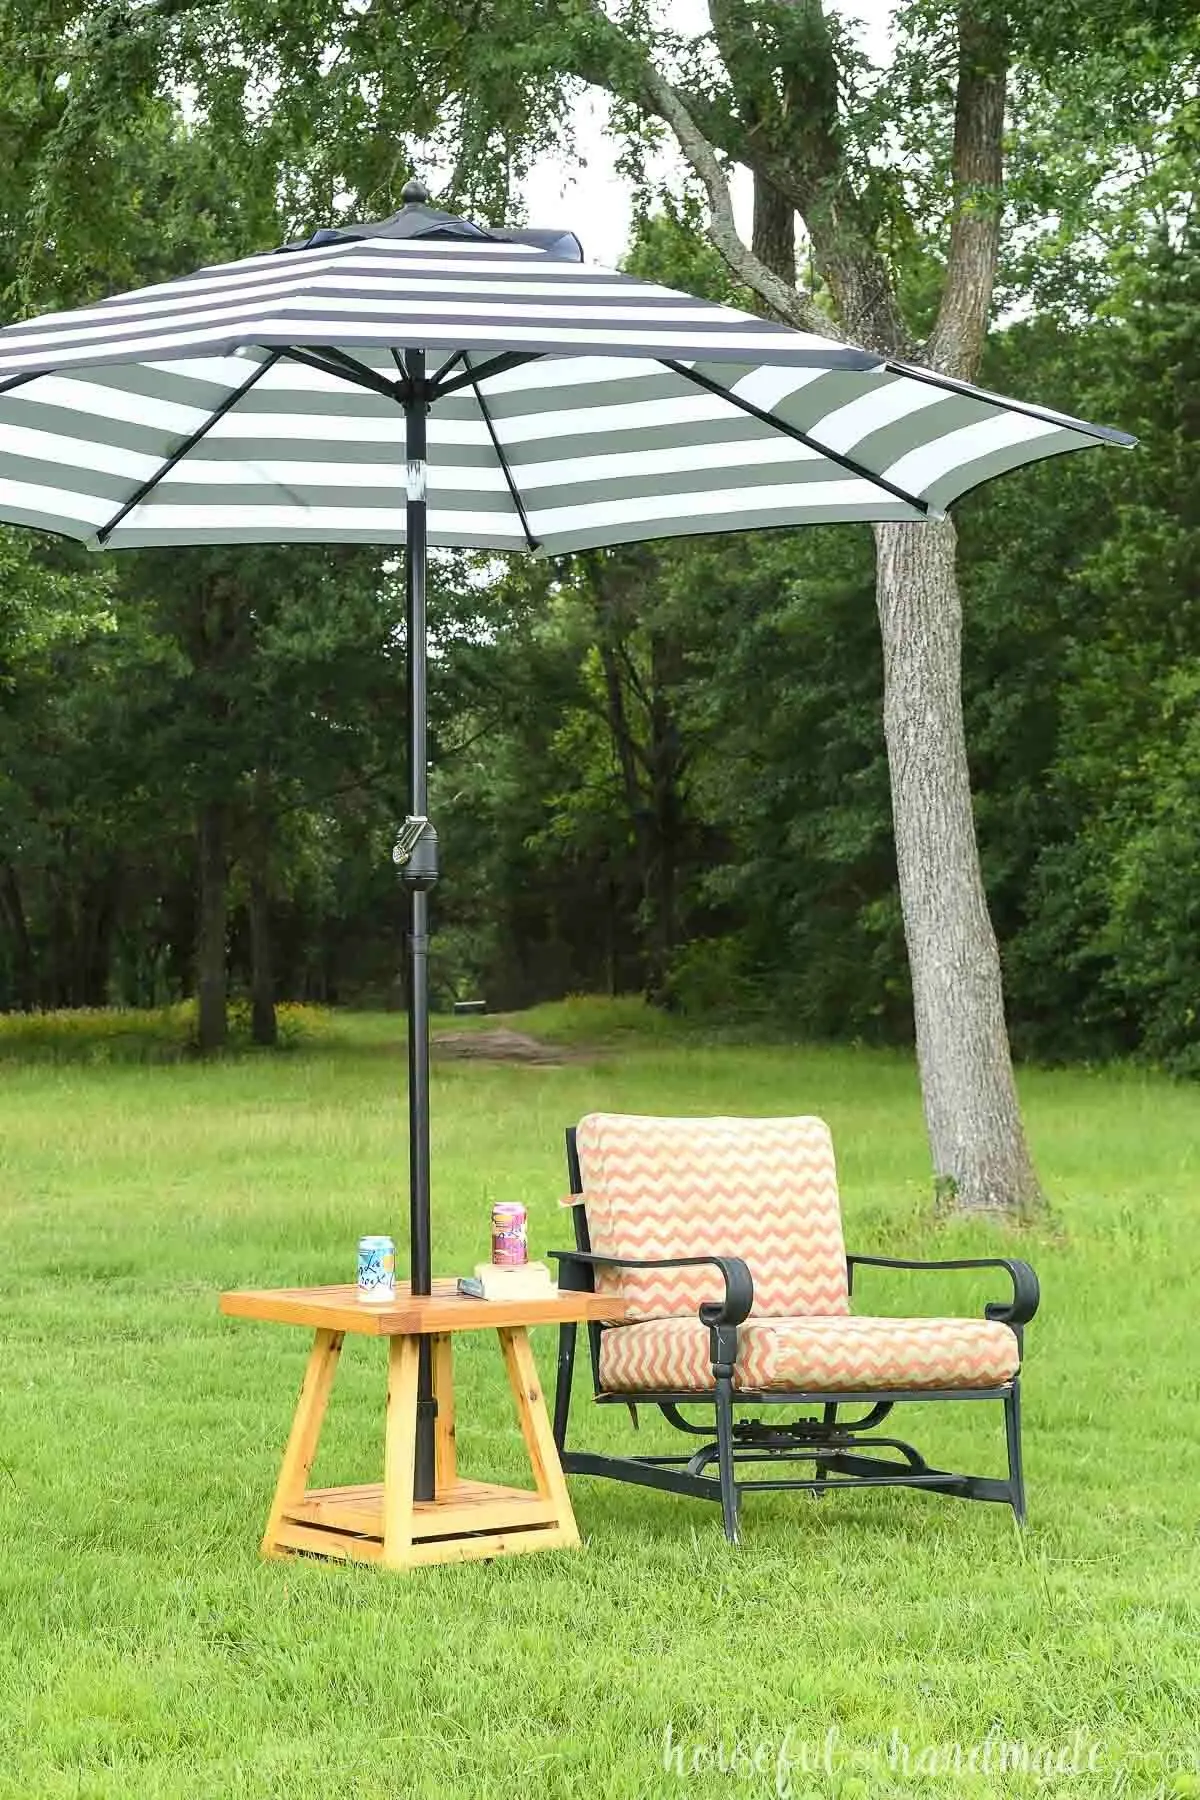 Small outdoor umbrella table next to chair on a lawn with trees in the background. 